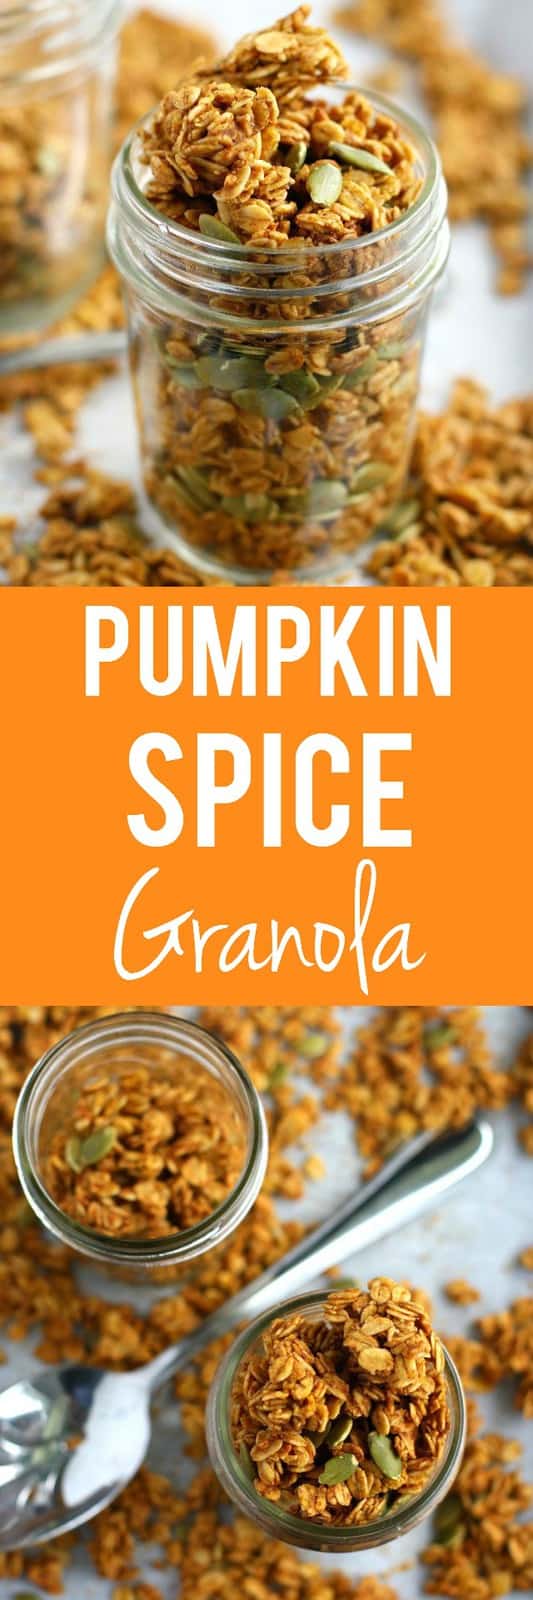 Make this easy pumpkin spice granola for a perfect fall breakfast or snack!